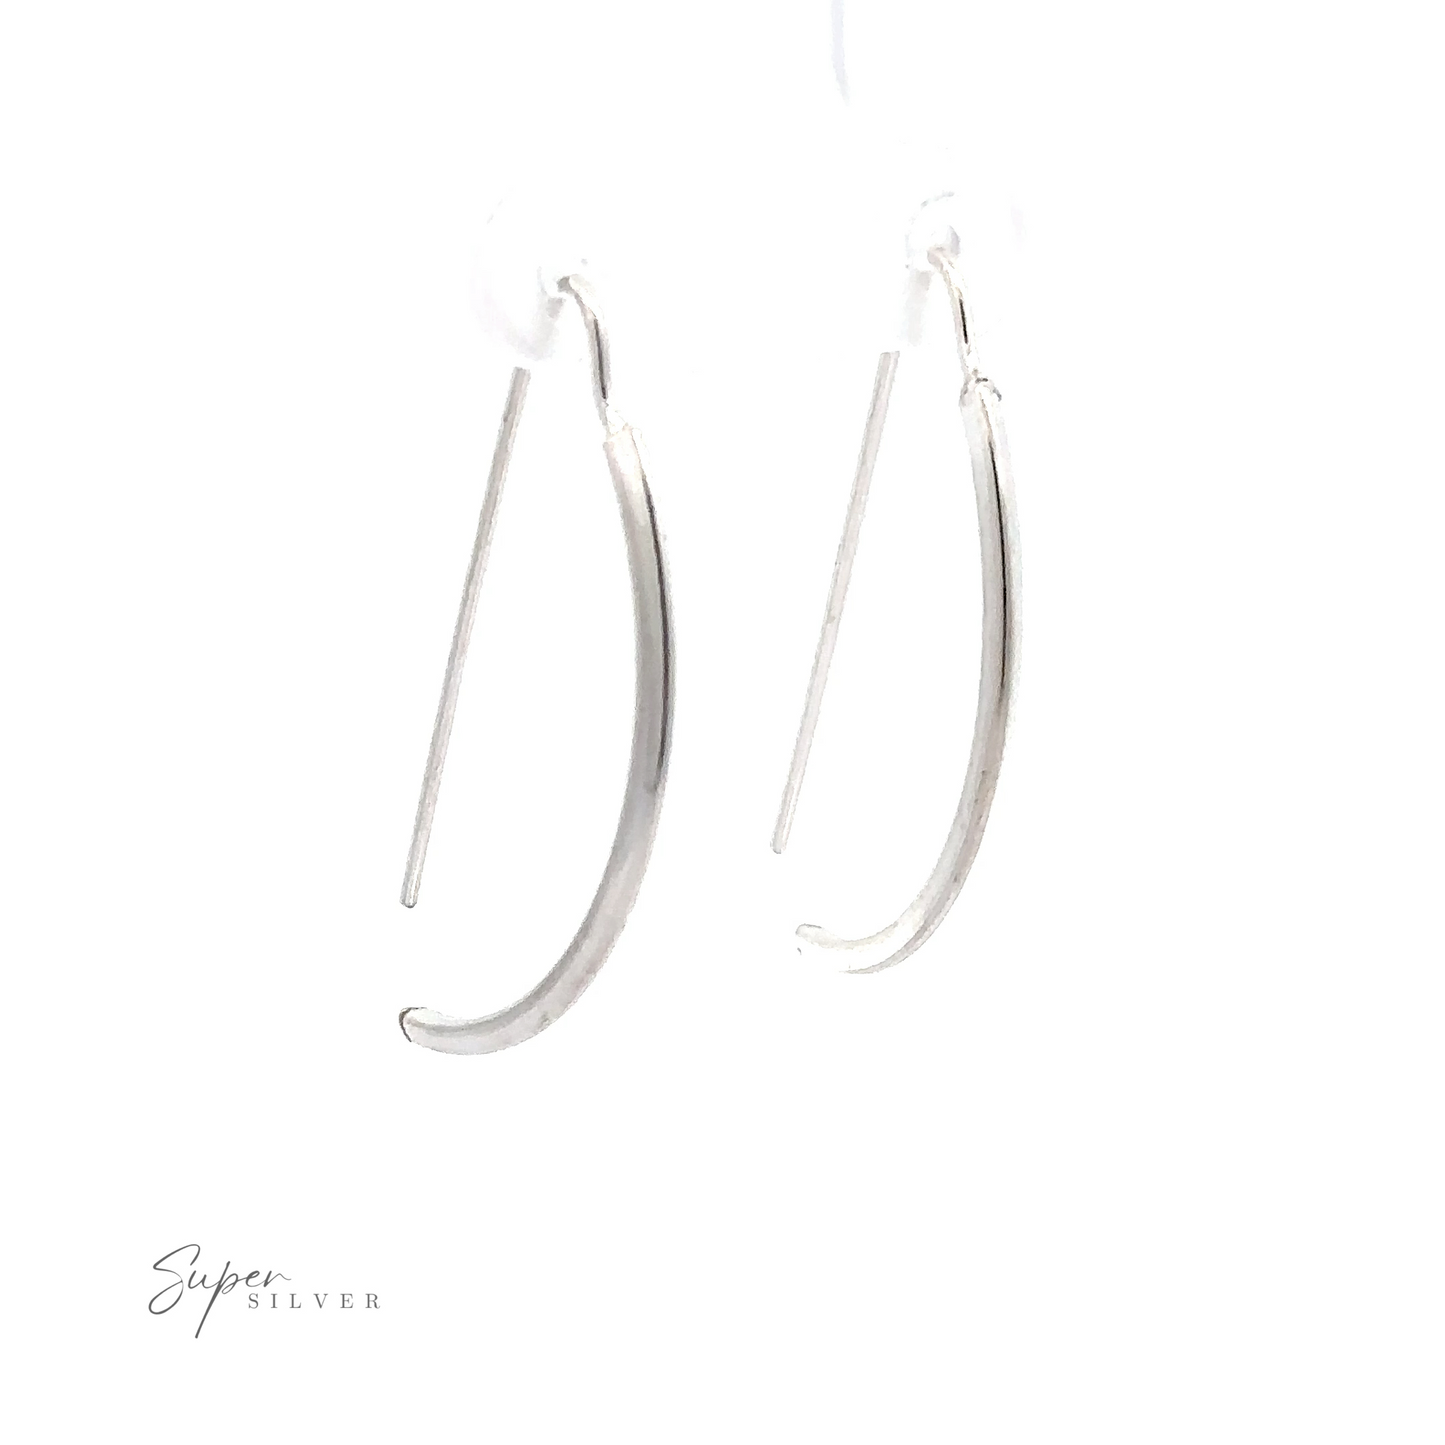 A pair of Fixed Curved Bar Earrings with a minimalist design on a white background.